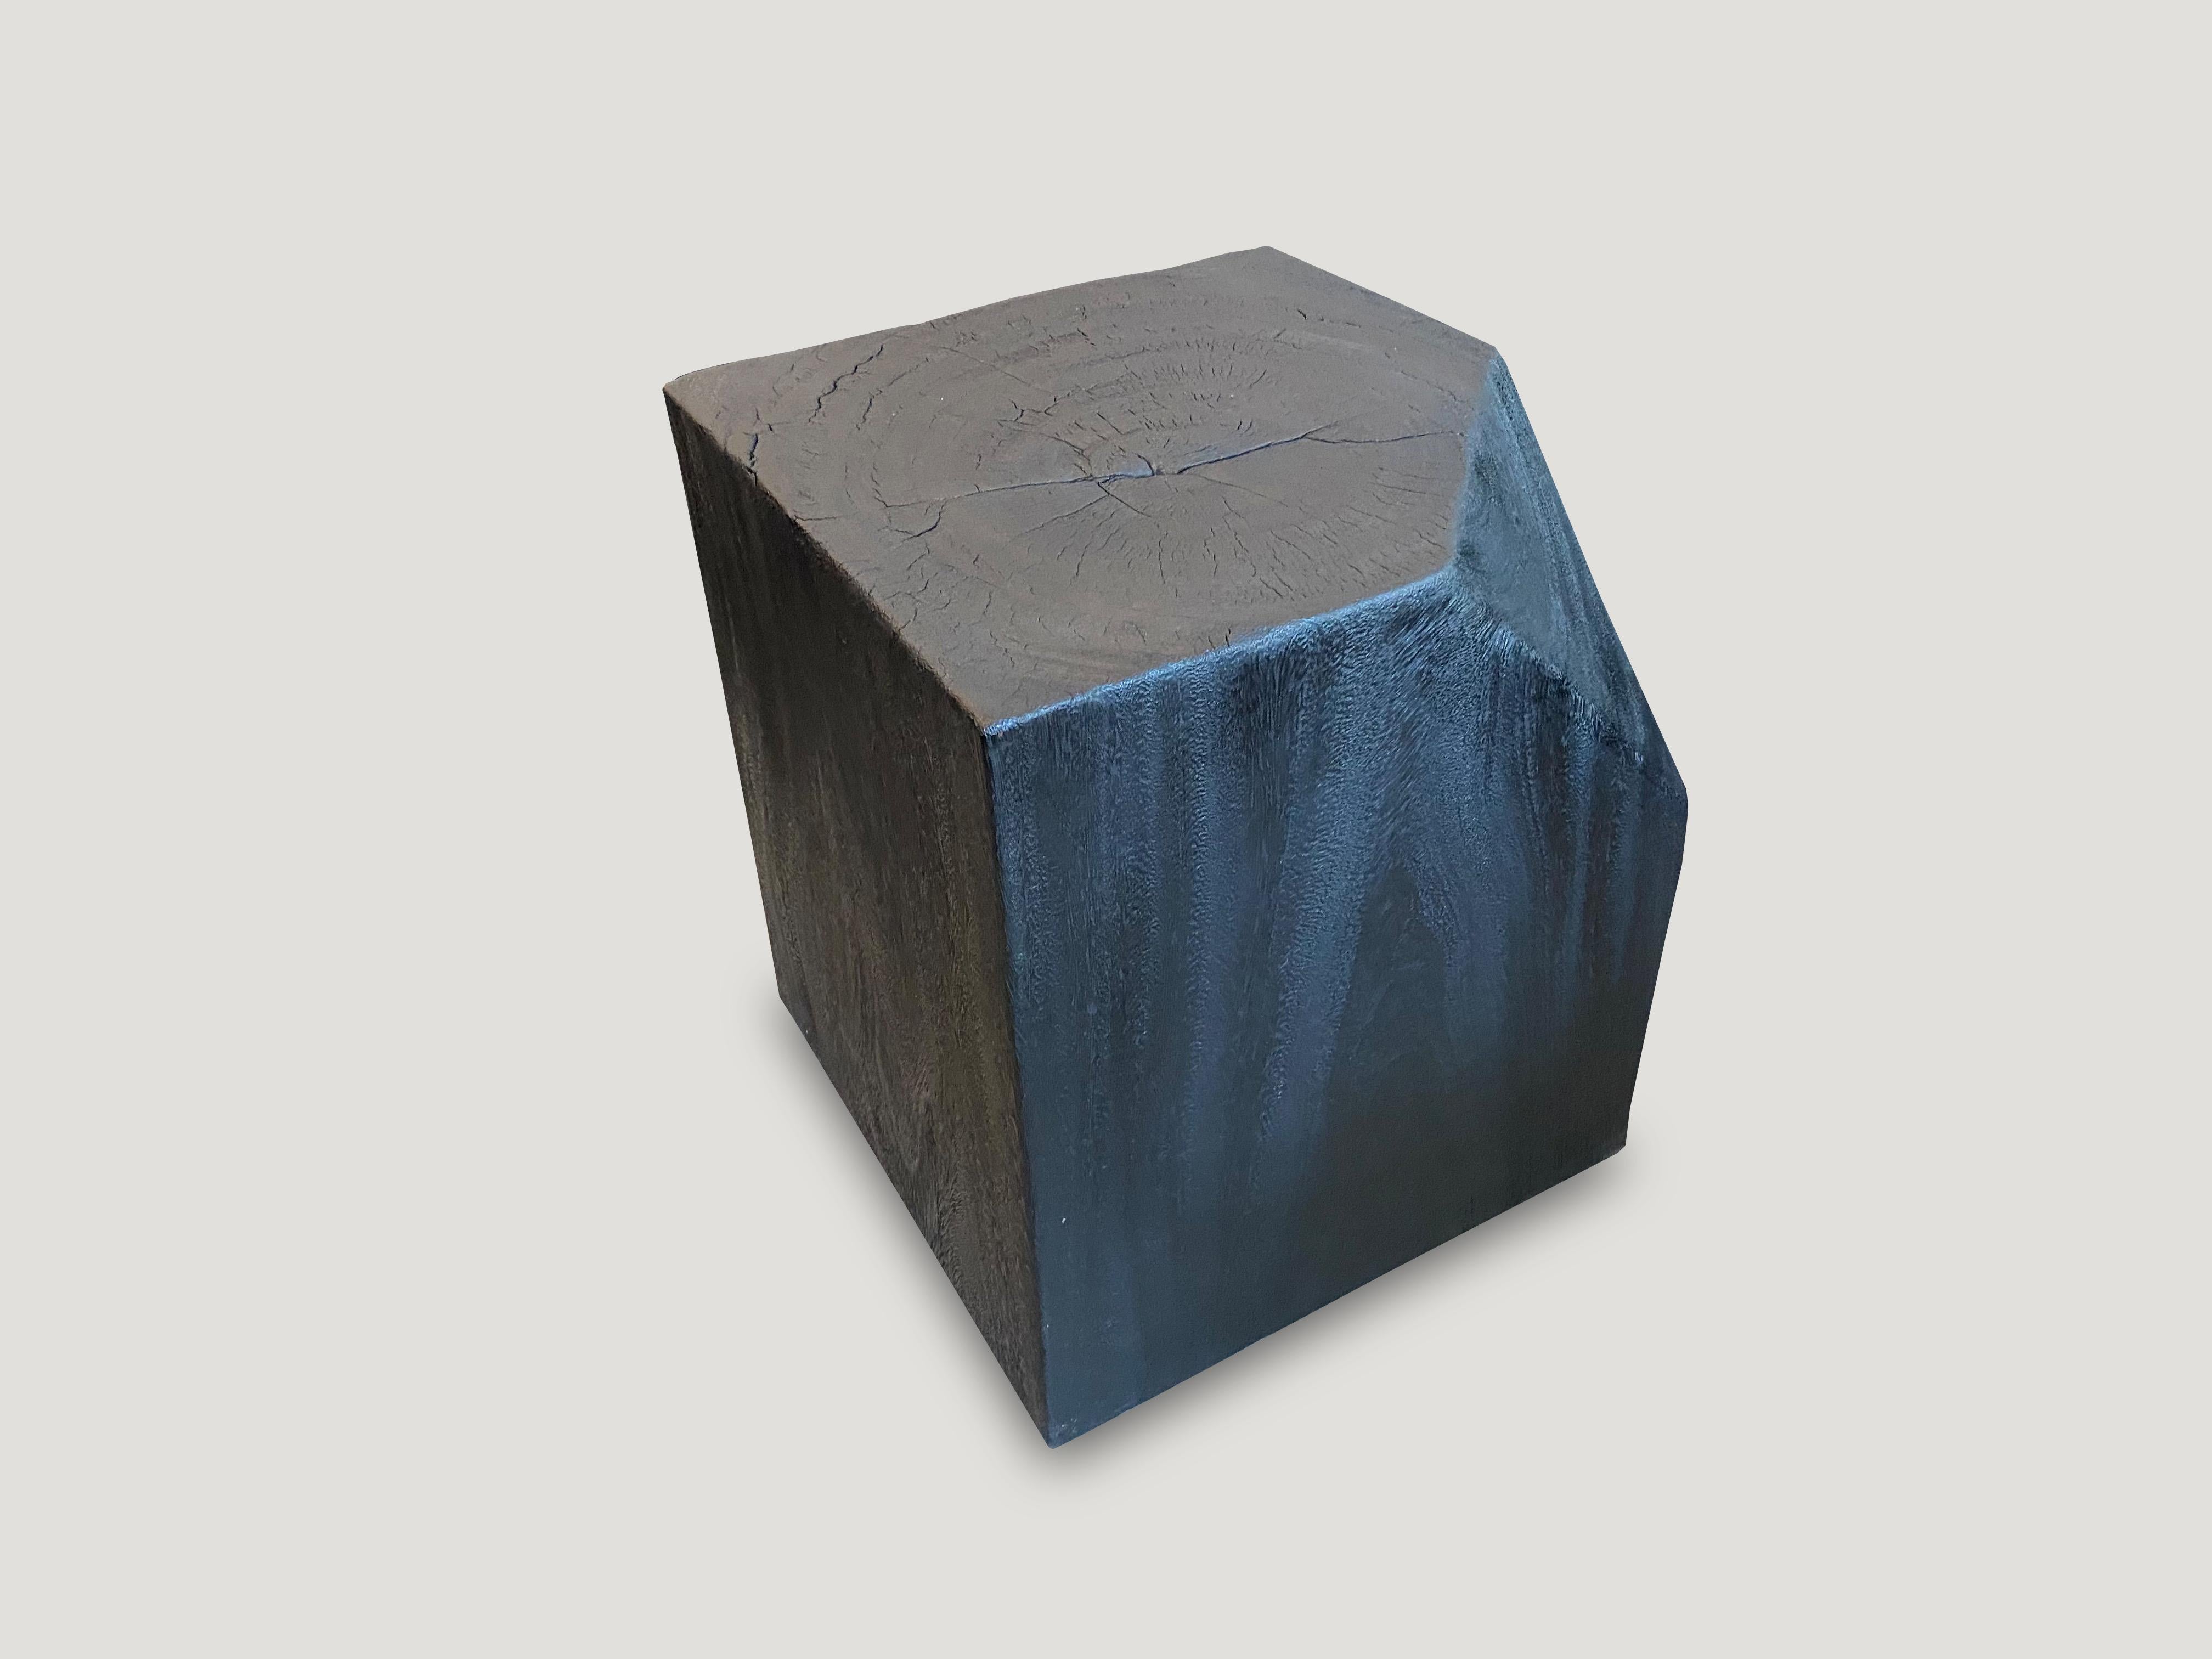 Faceted reclaimed suar wood side table, Charred, sanded and sealed, exposing the beautiful grain of the wood. We have a collection of three available. The price reflects the one shown. The final images show the three together. 

The Triple Burnt